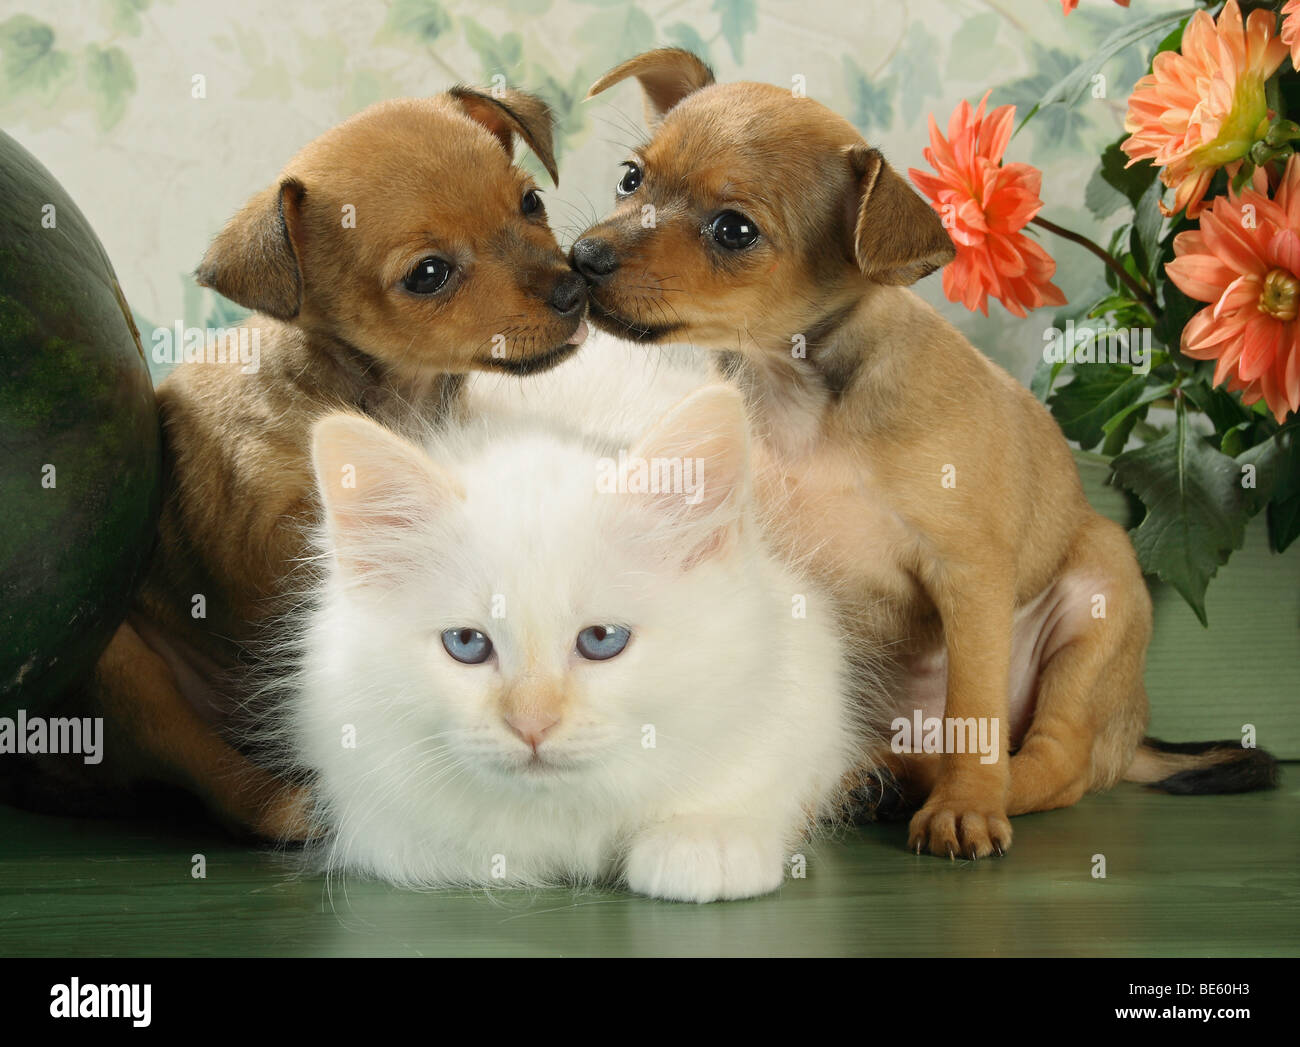 animal friendship: Sacred cat of Burma kitten and two Russian Toy Terrier puppies Stock Photo